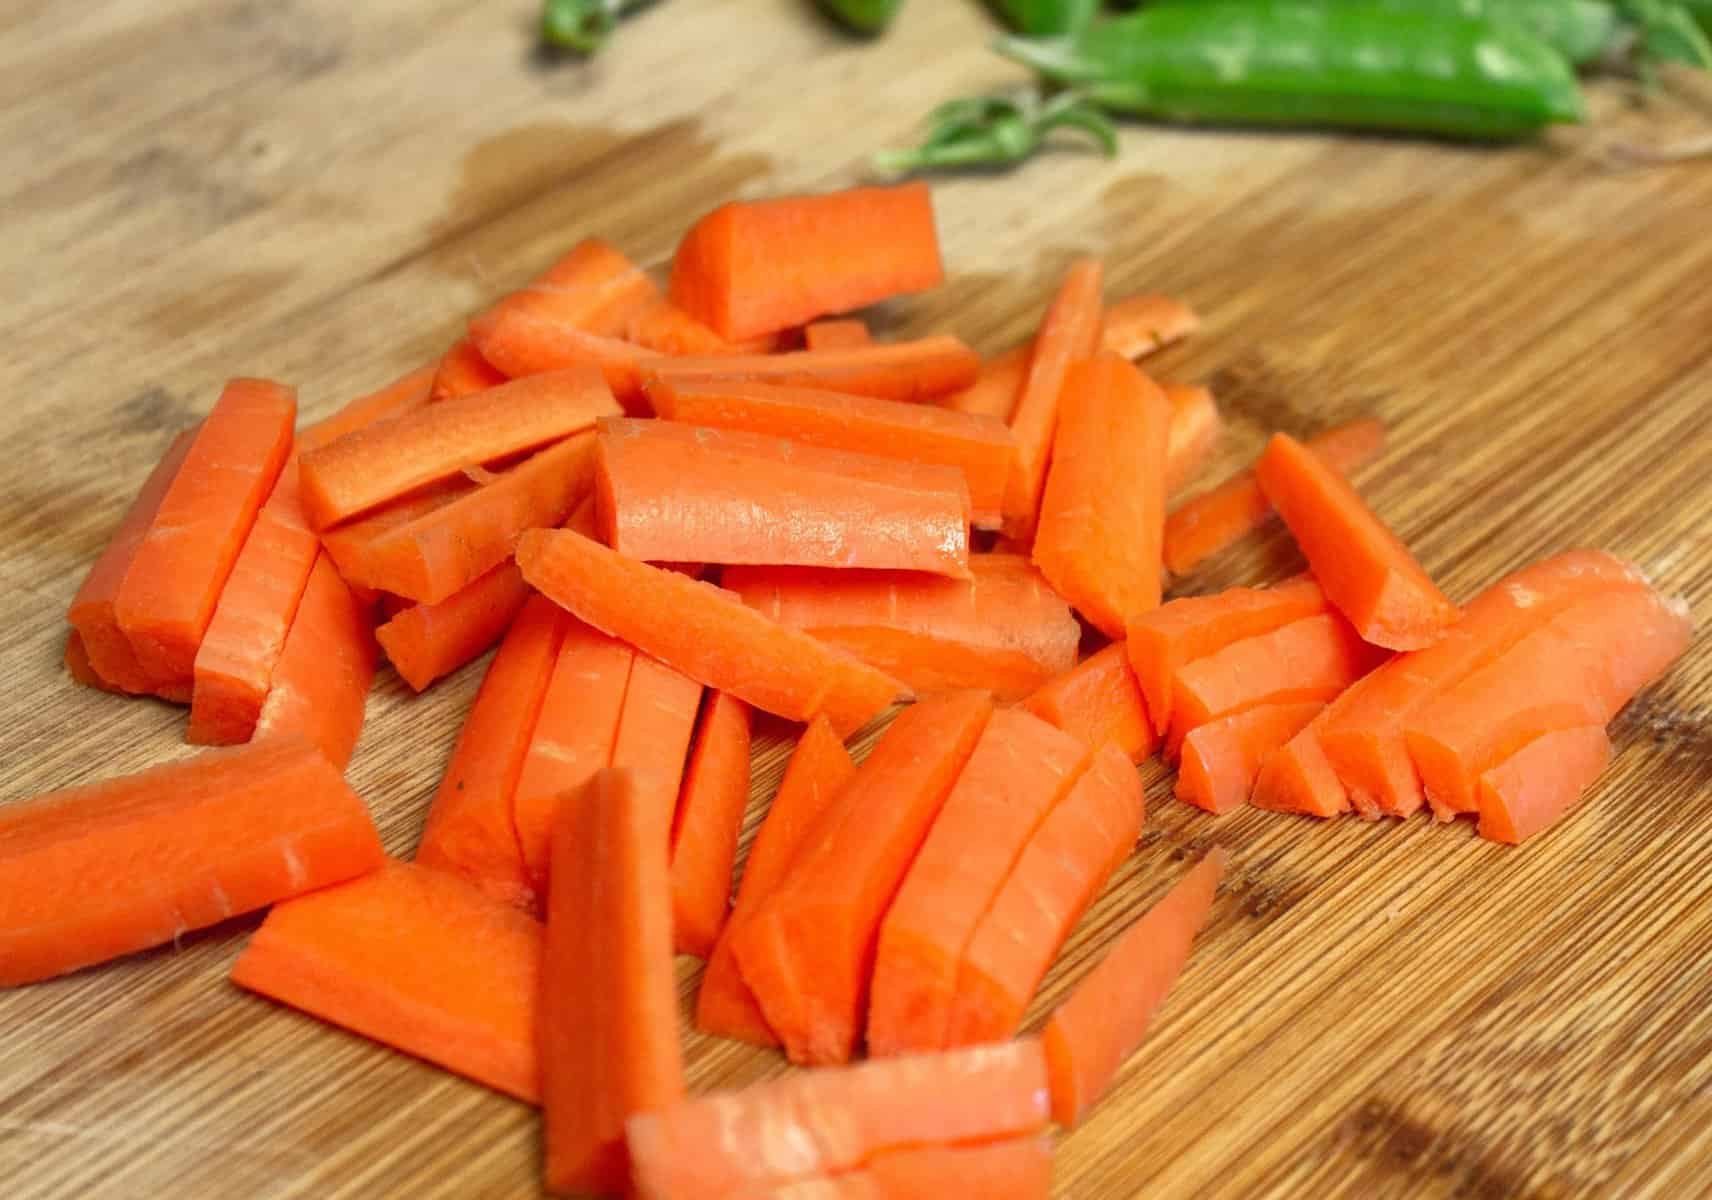 chopped carrots on wooden cutting board